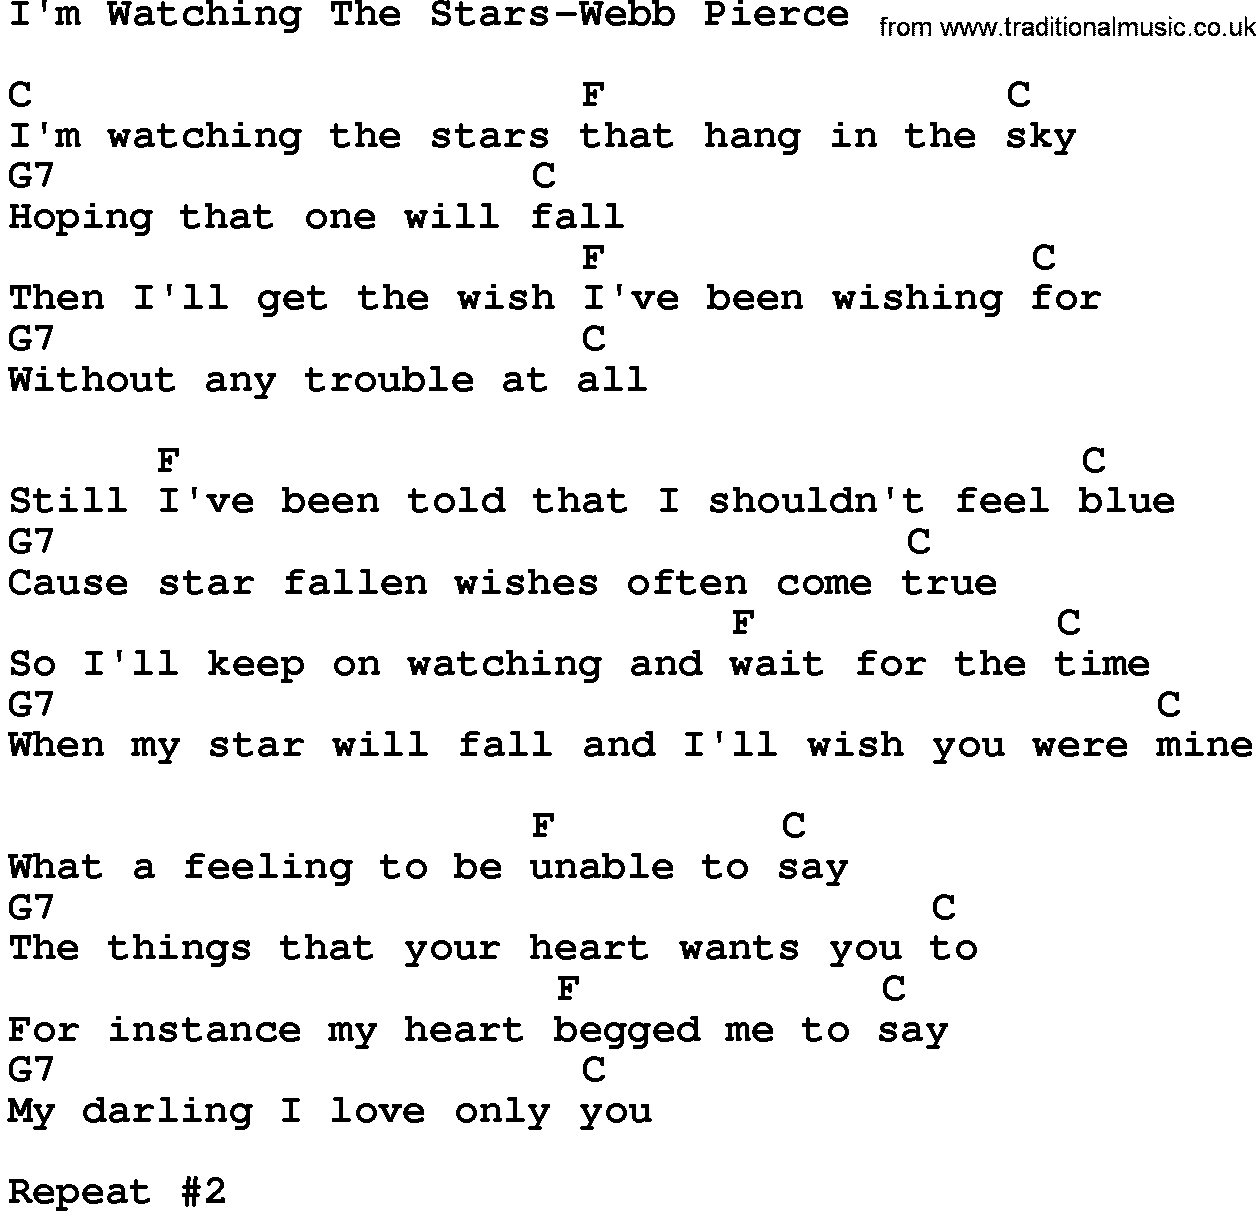 Country music song: I'm Watching The Stars-Webb Pierce lyrics and chords